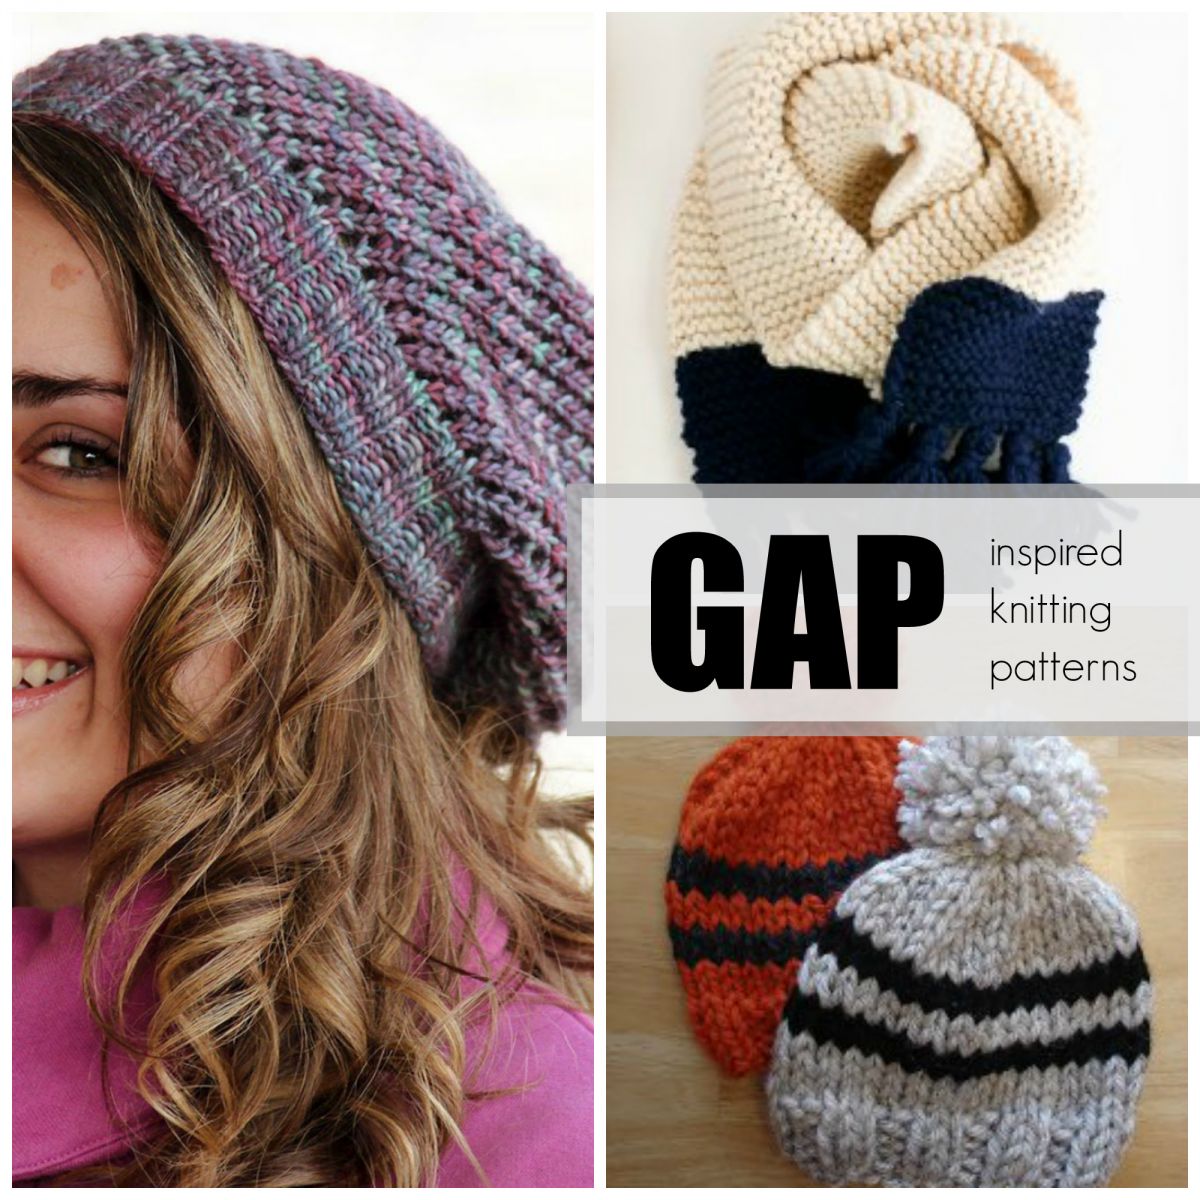 DIY Fashion Projects 36 Easy Knitting Projects Inspired by Brand Names